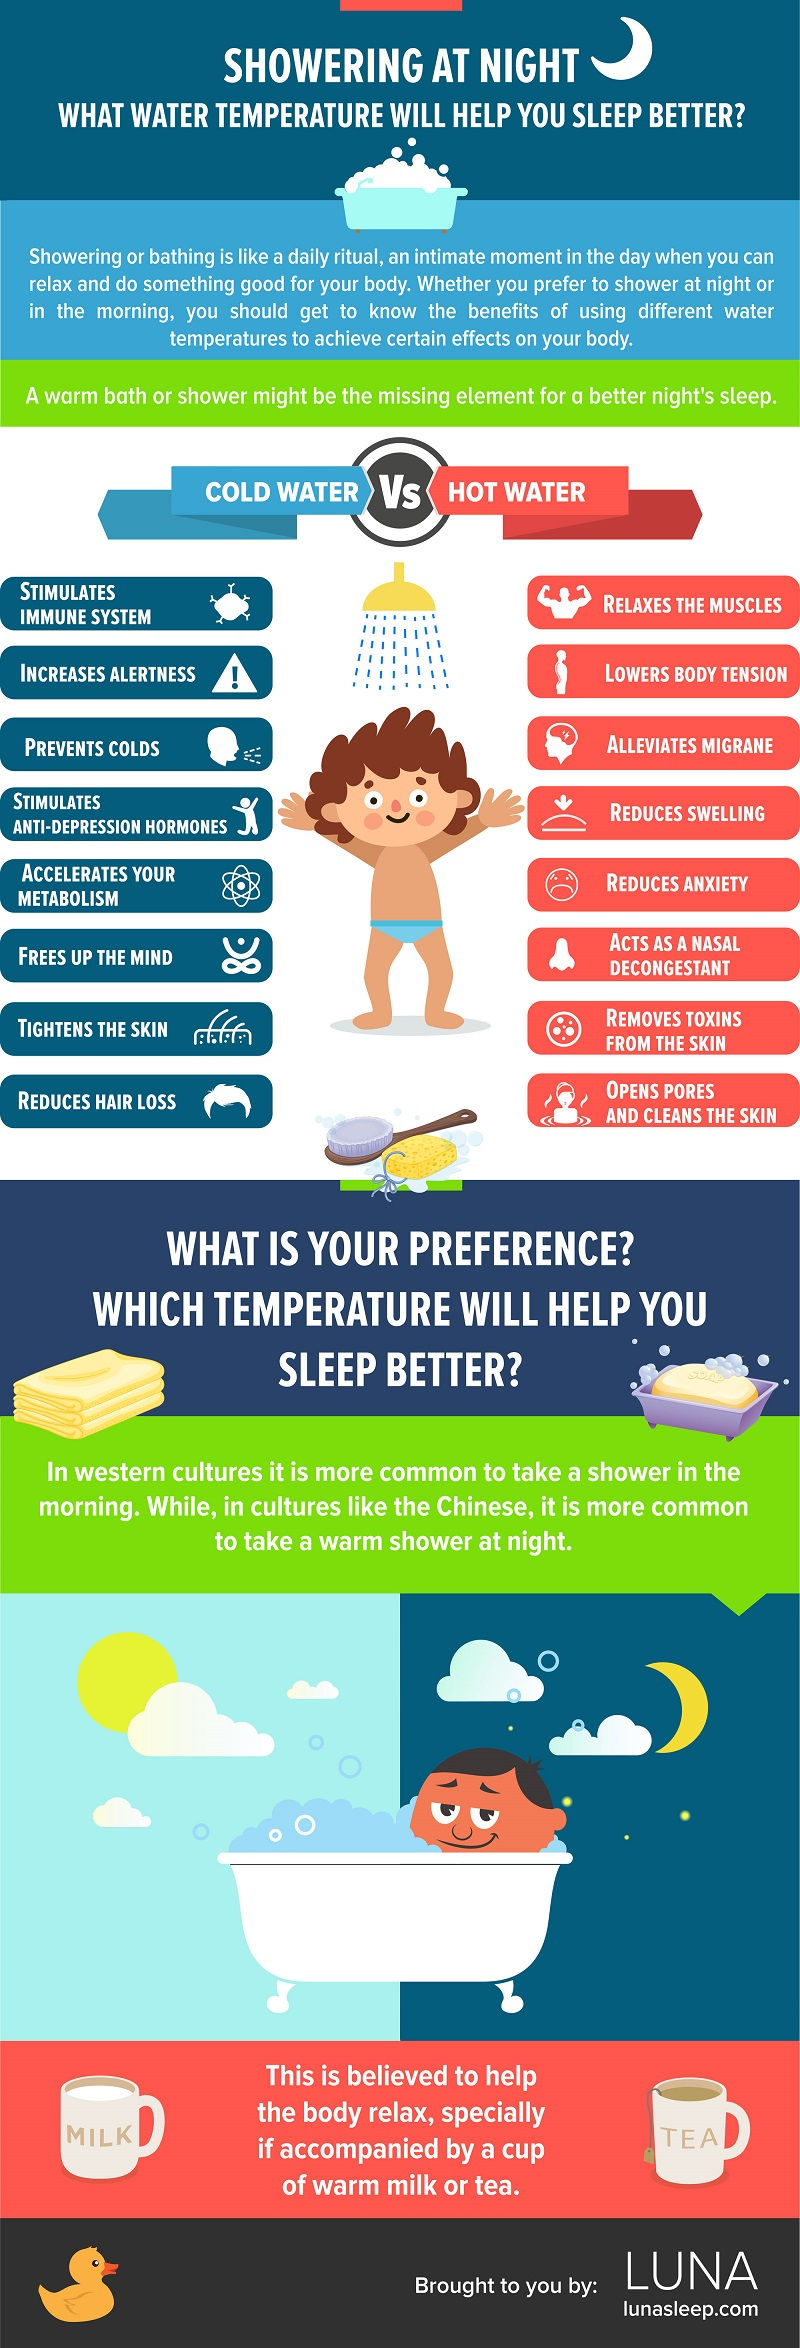 What Water Temperature will Help You Sleep Better?